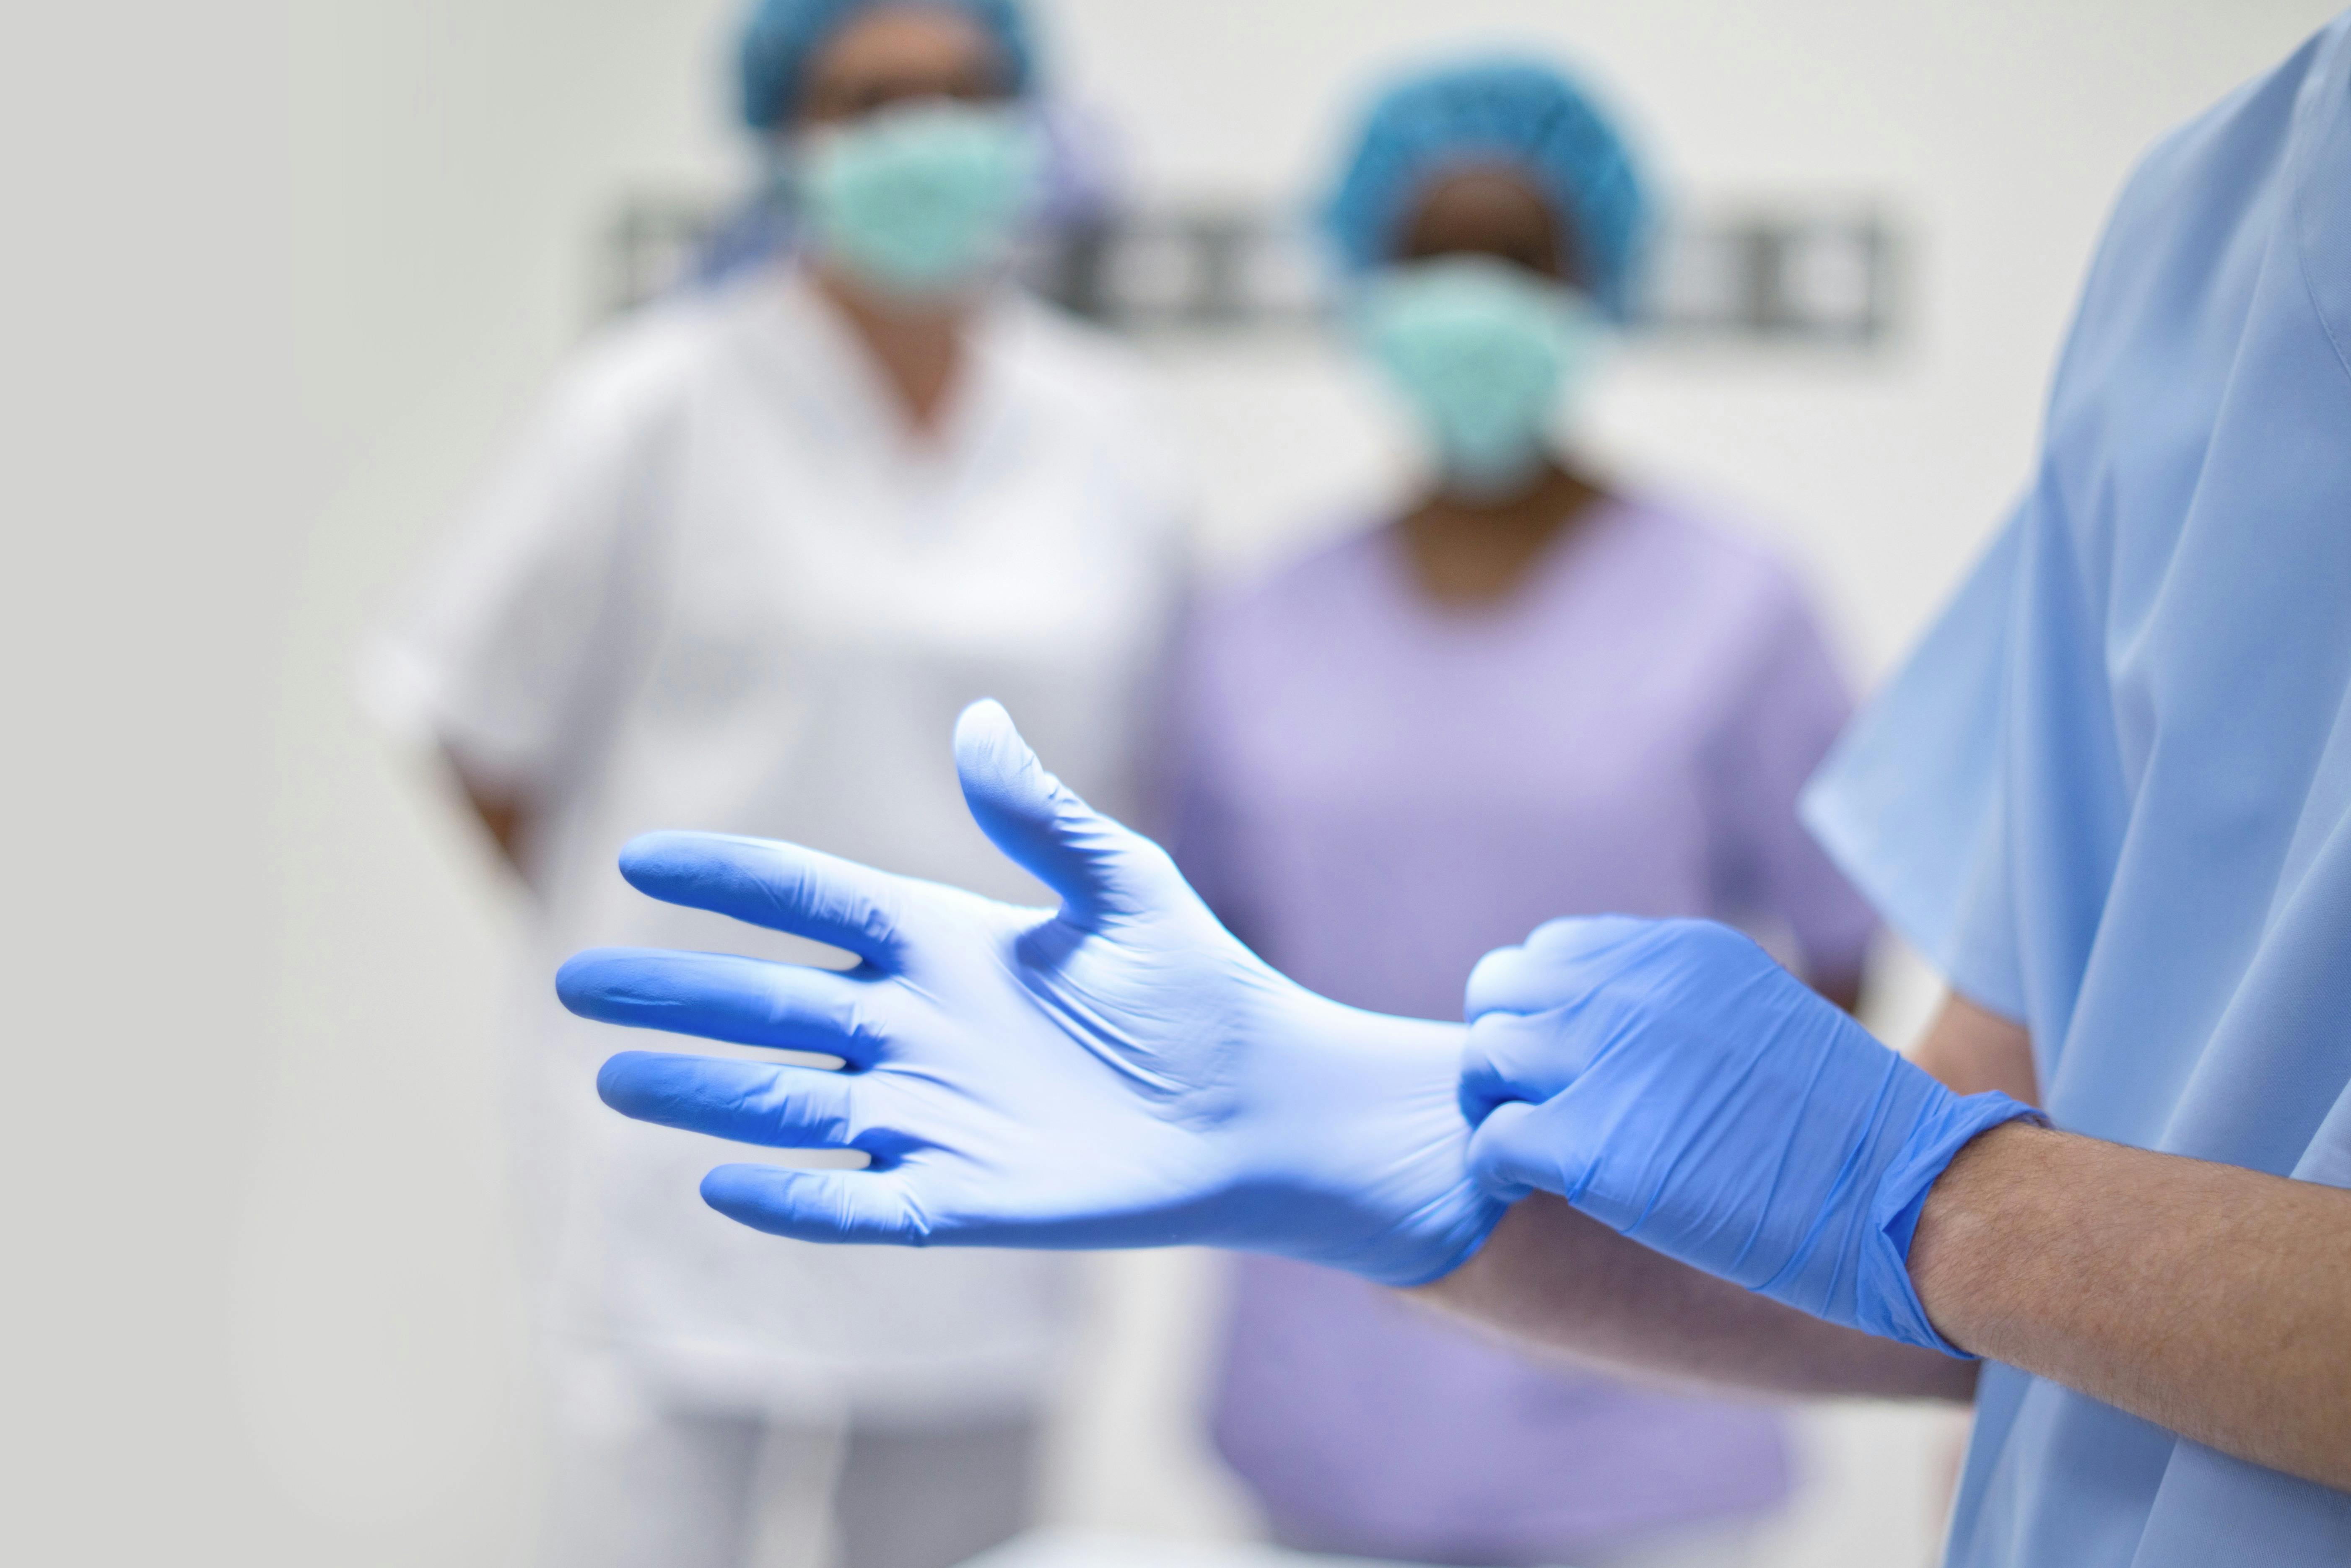 *** ROYALTY FREE - special pris *** Surgeon putting on latex glove. Keywords: adult, one person, background people, care, health, healthcare, medicine, doctor, cropped, medical occupation, hands, surgeon, surgery, hospital, preparation, hygiene, hygienic, care, safety, latex glove, blue, close up, putting on, operating theatre, nurse Modelreleased: YES Property Released: YES